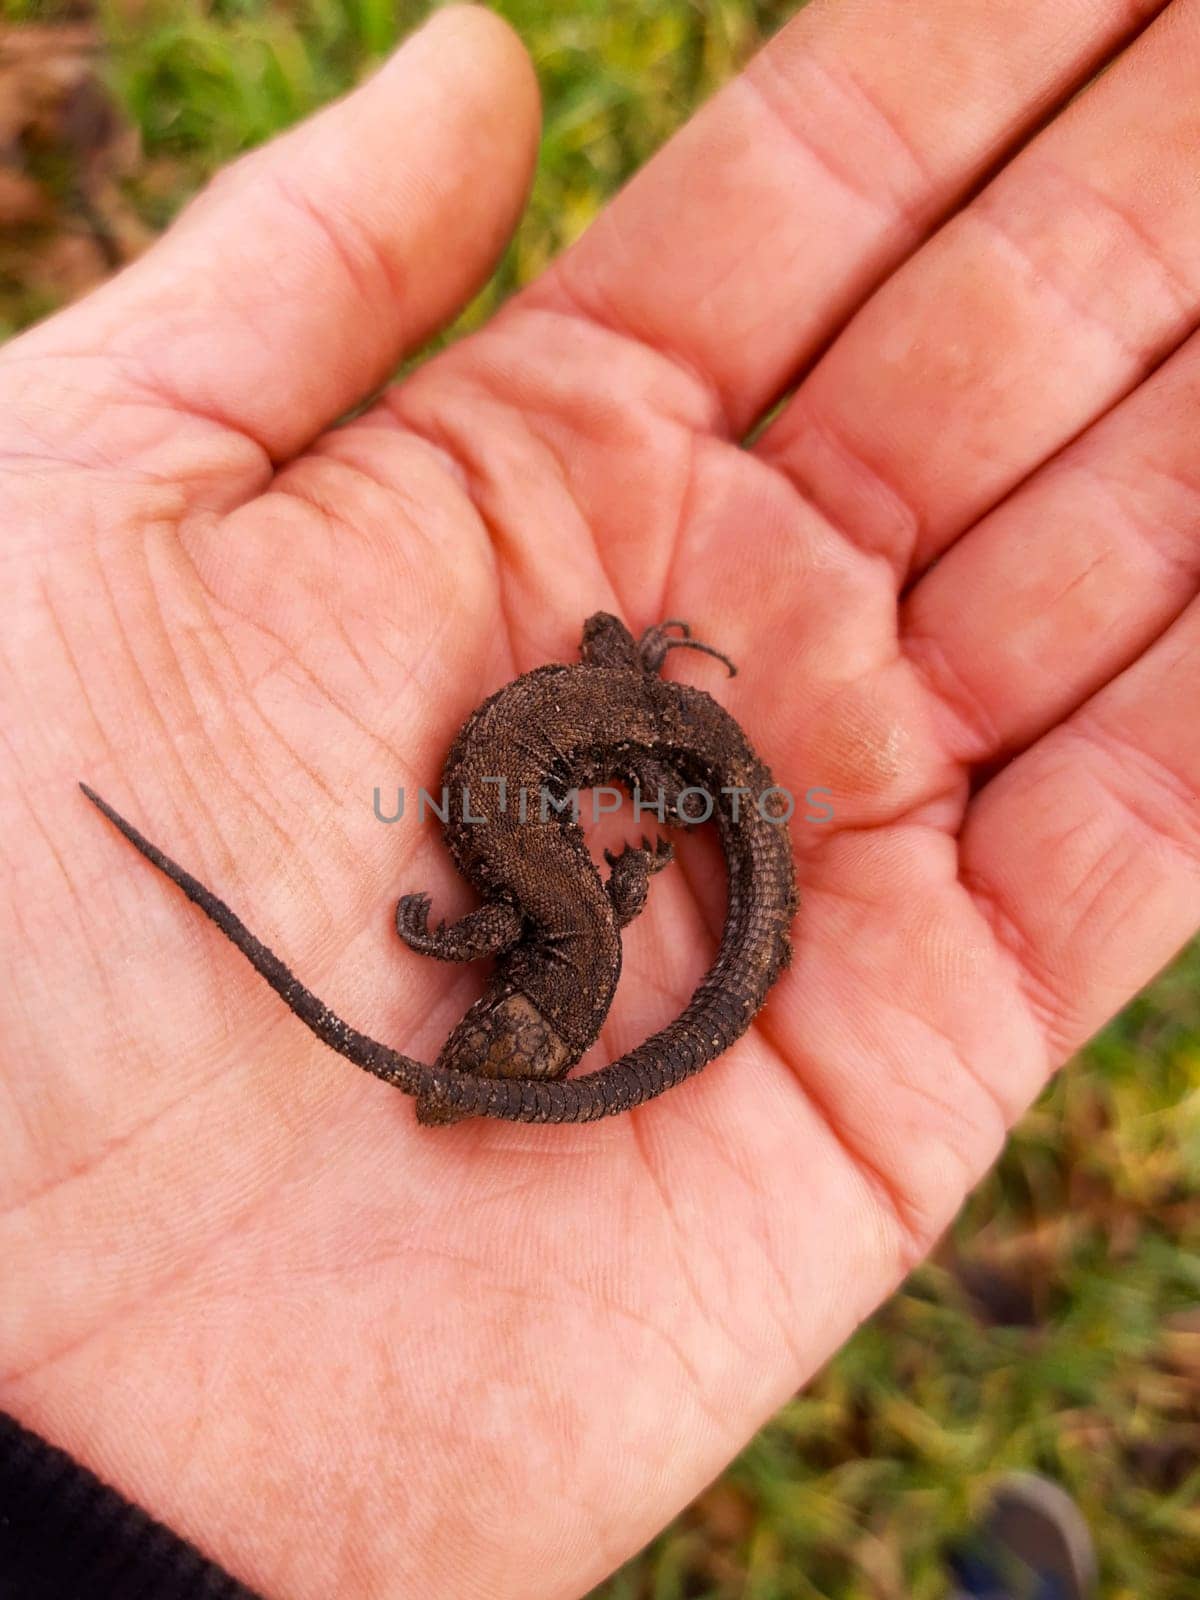 Sleeping small brown earthen lizard in the palm of your hand.